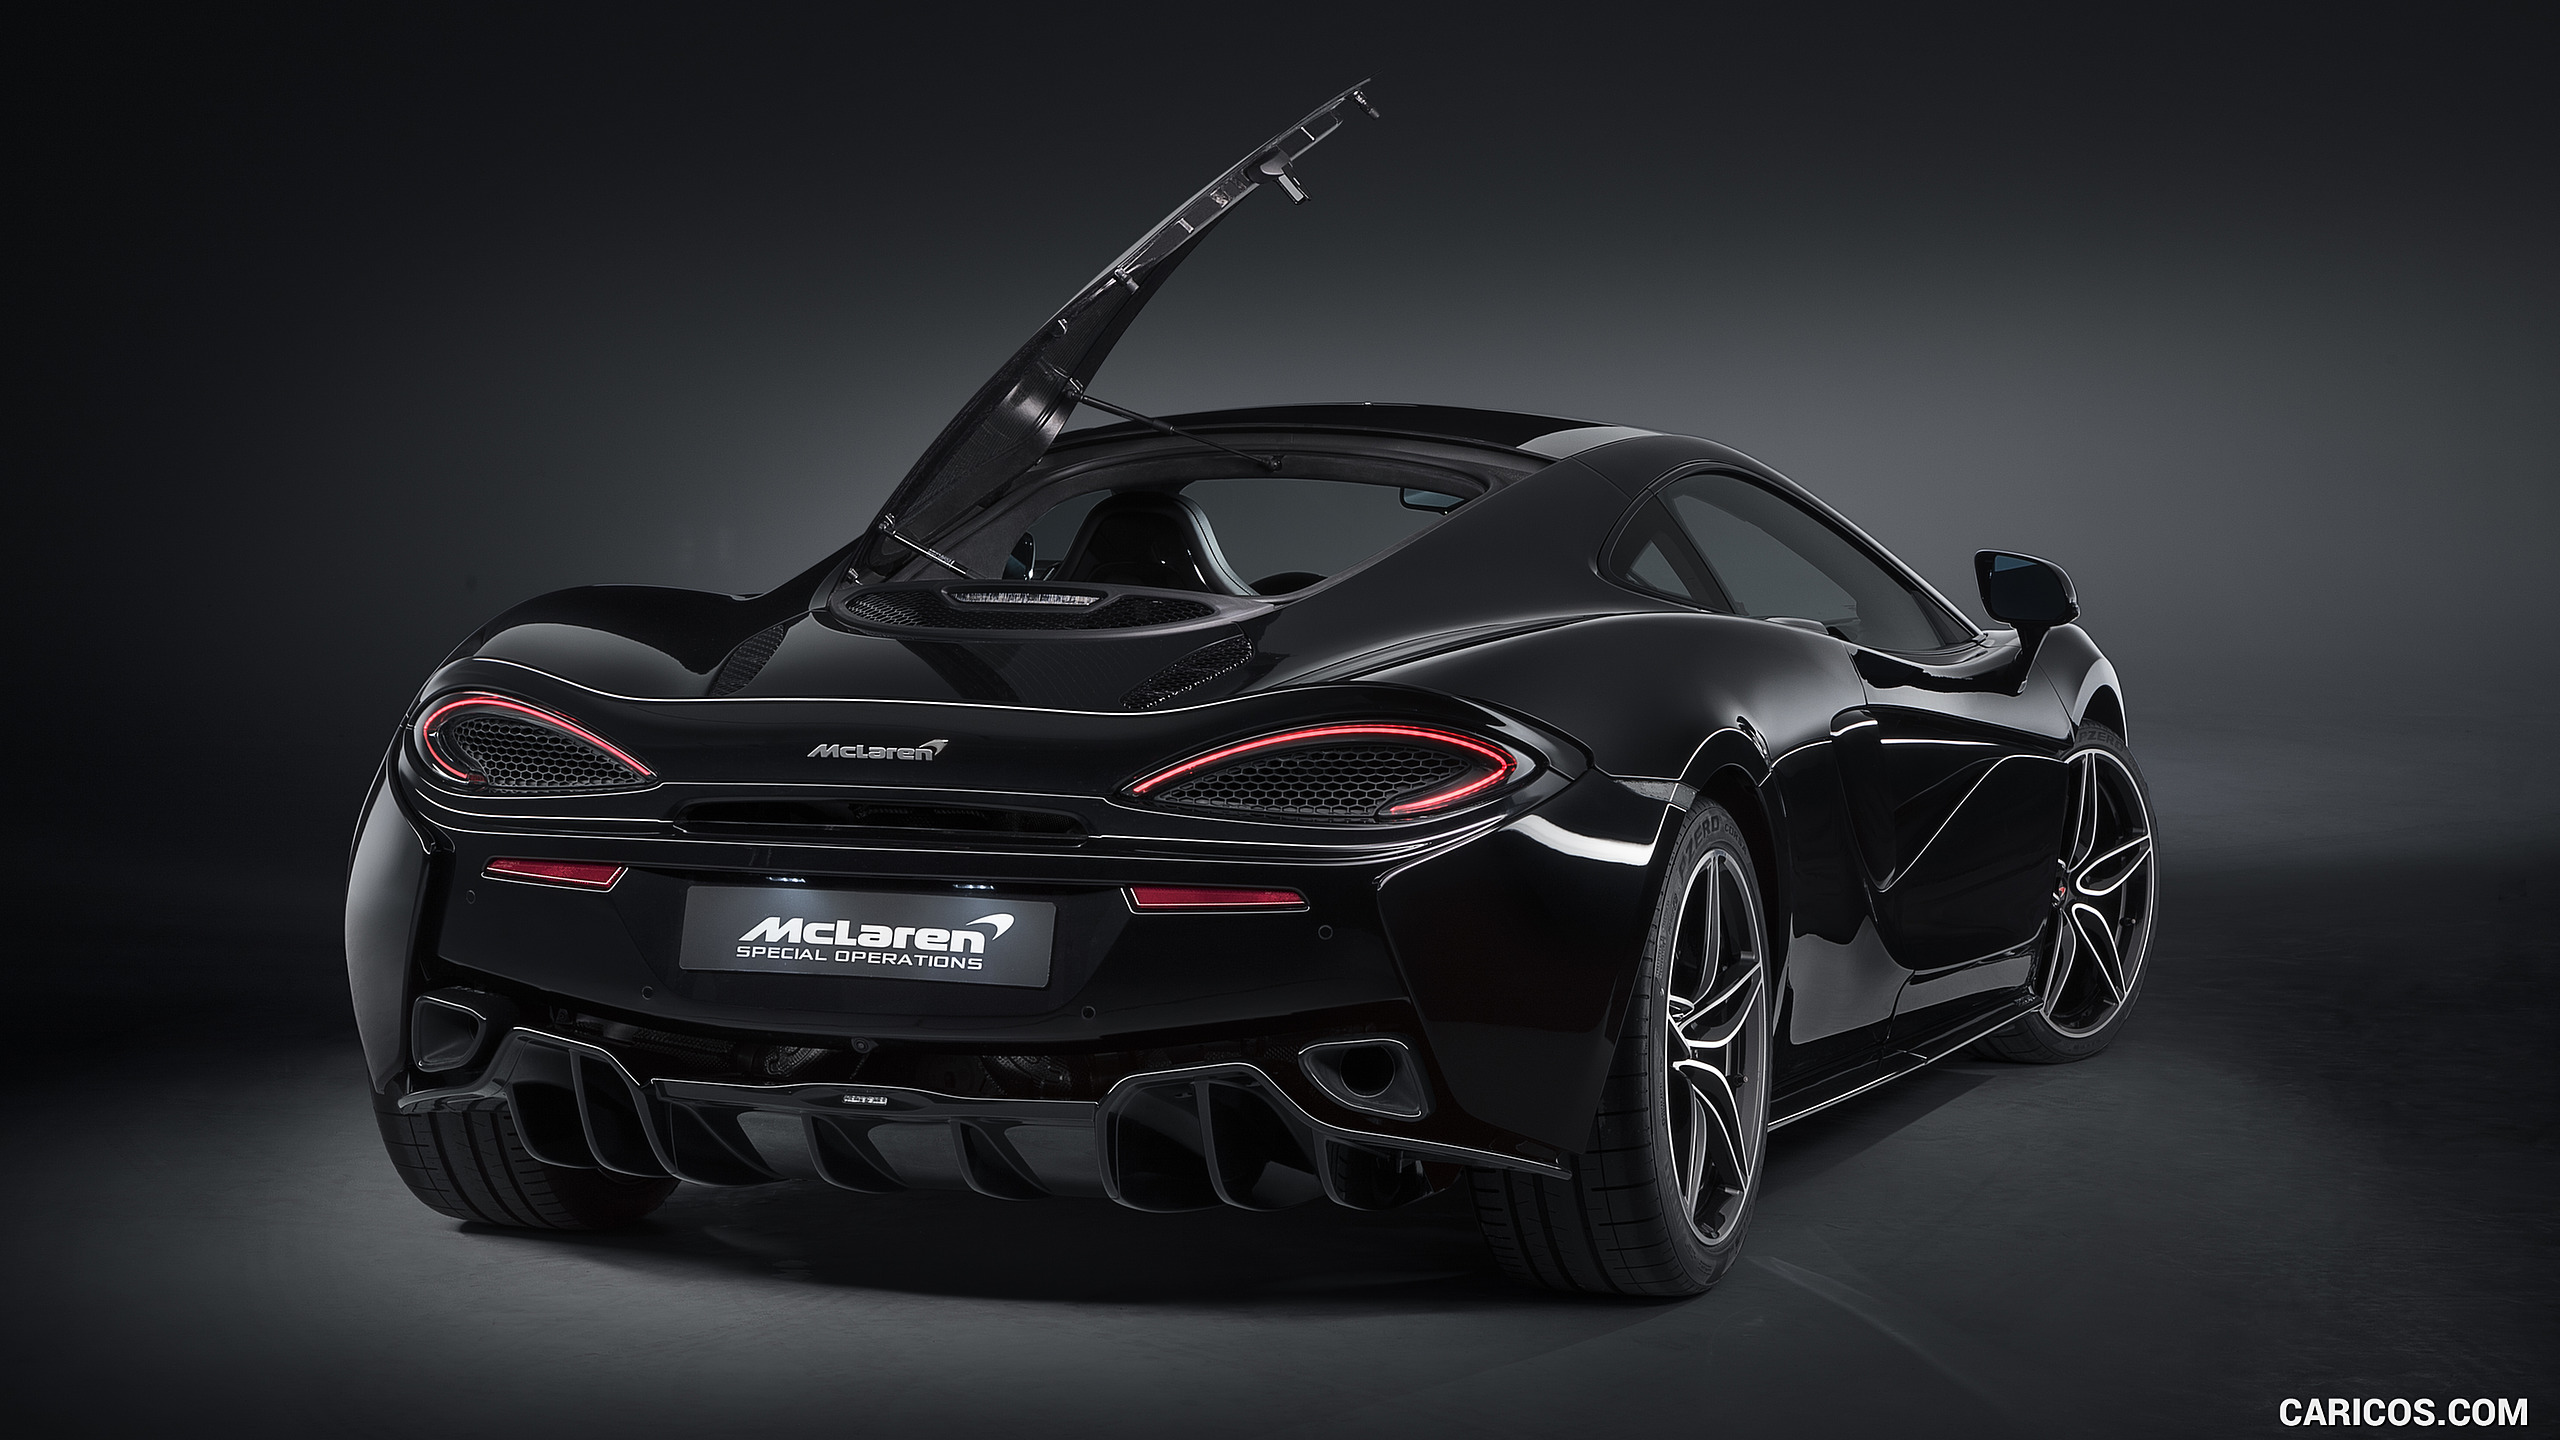 2018 McLaren 570GT MSO Black Collection - Front Three-Quarter, #3 of 10